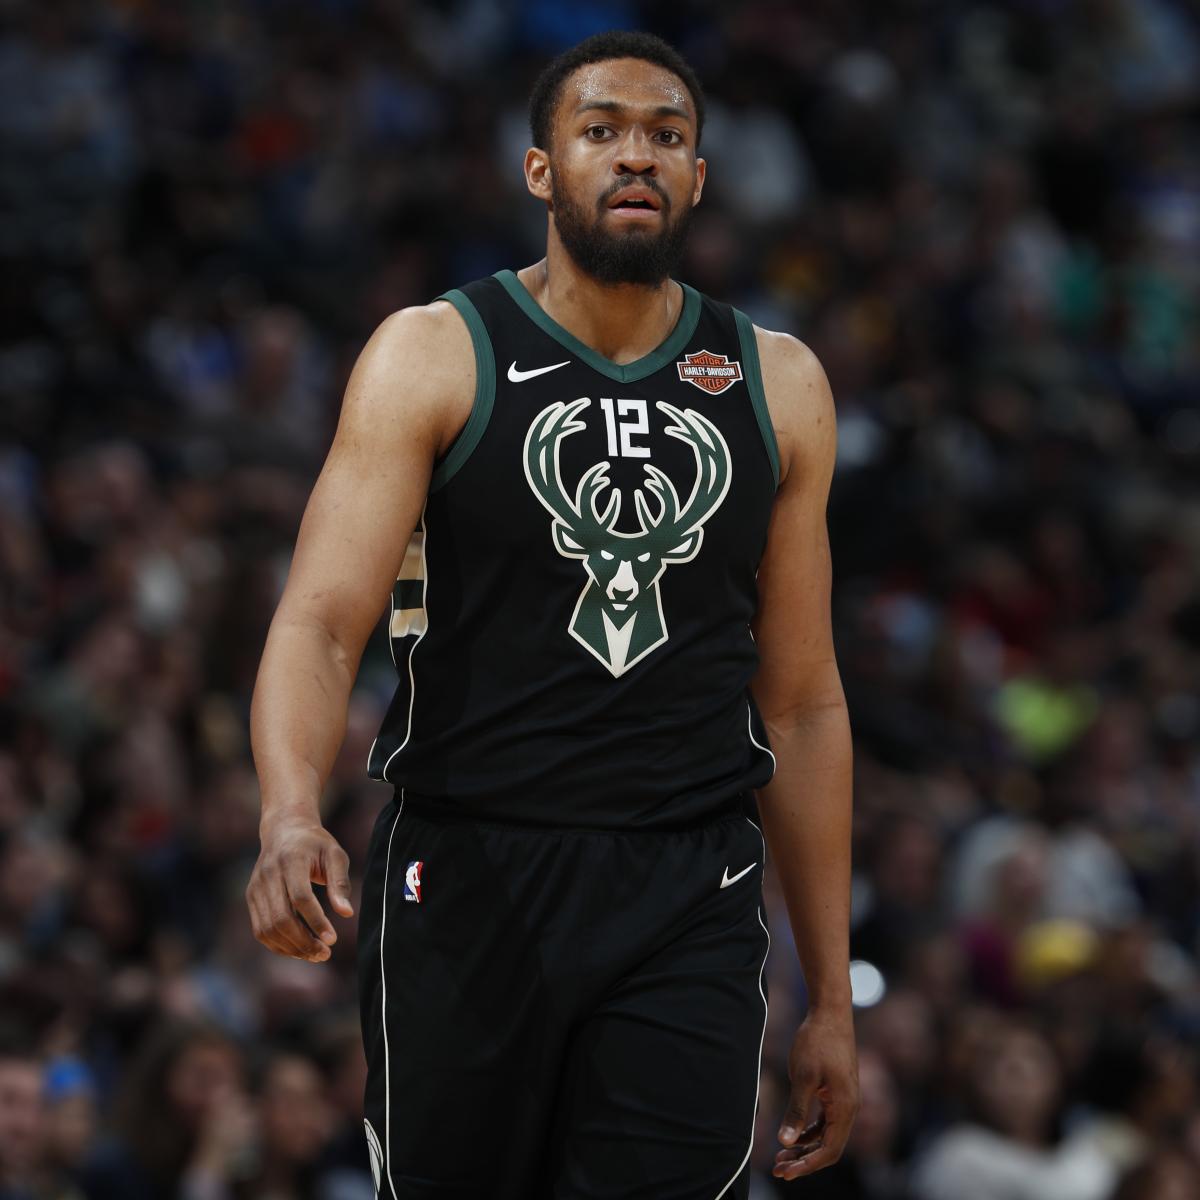 Jabari Parker officially agrees to a one-year deal with FC Barcelona